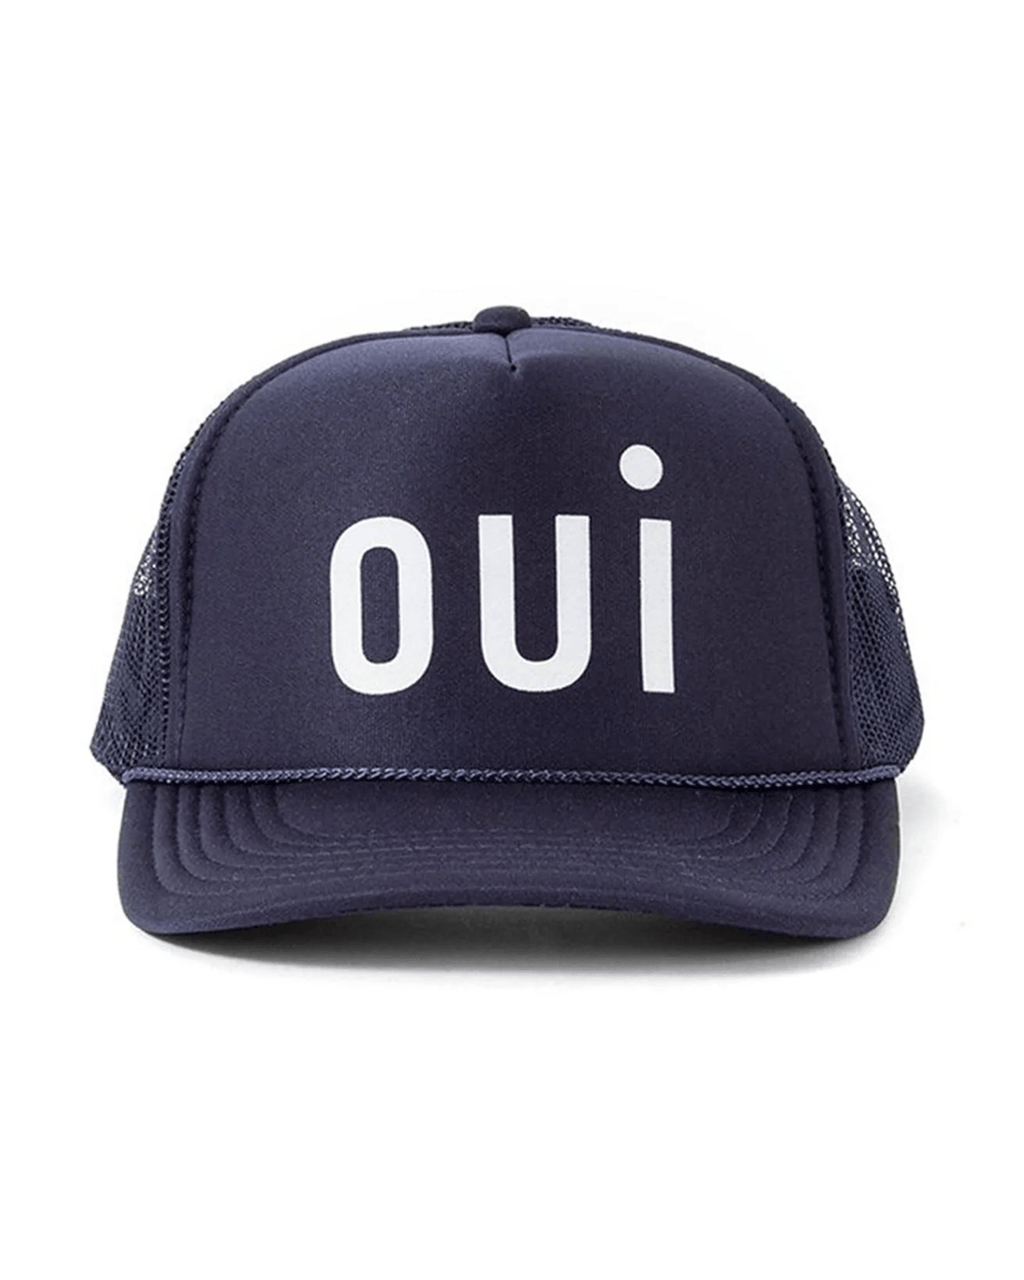 Clare V. Trucker Hat - Oui - Navy w/ White- Bliss Boutiques